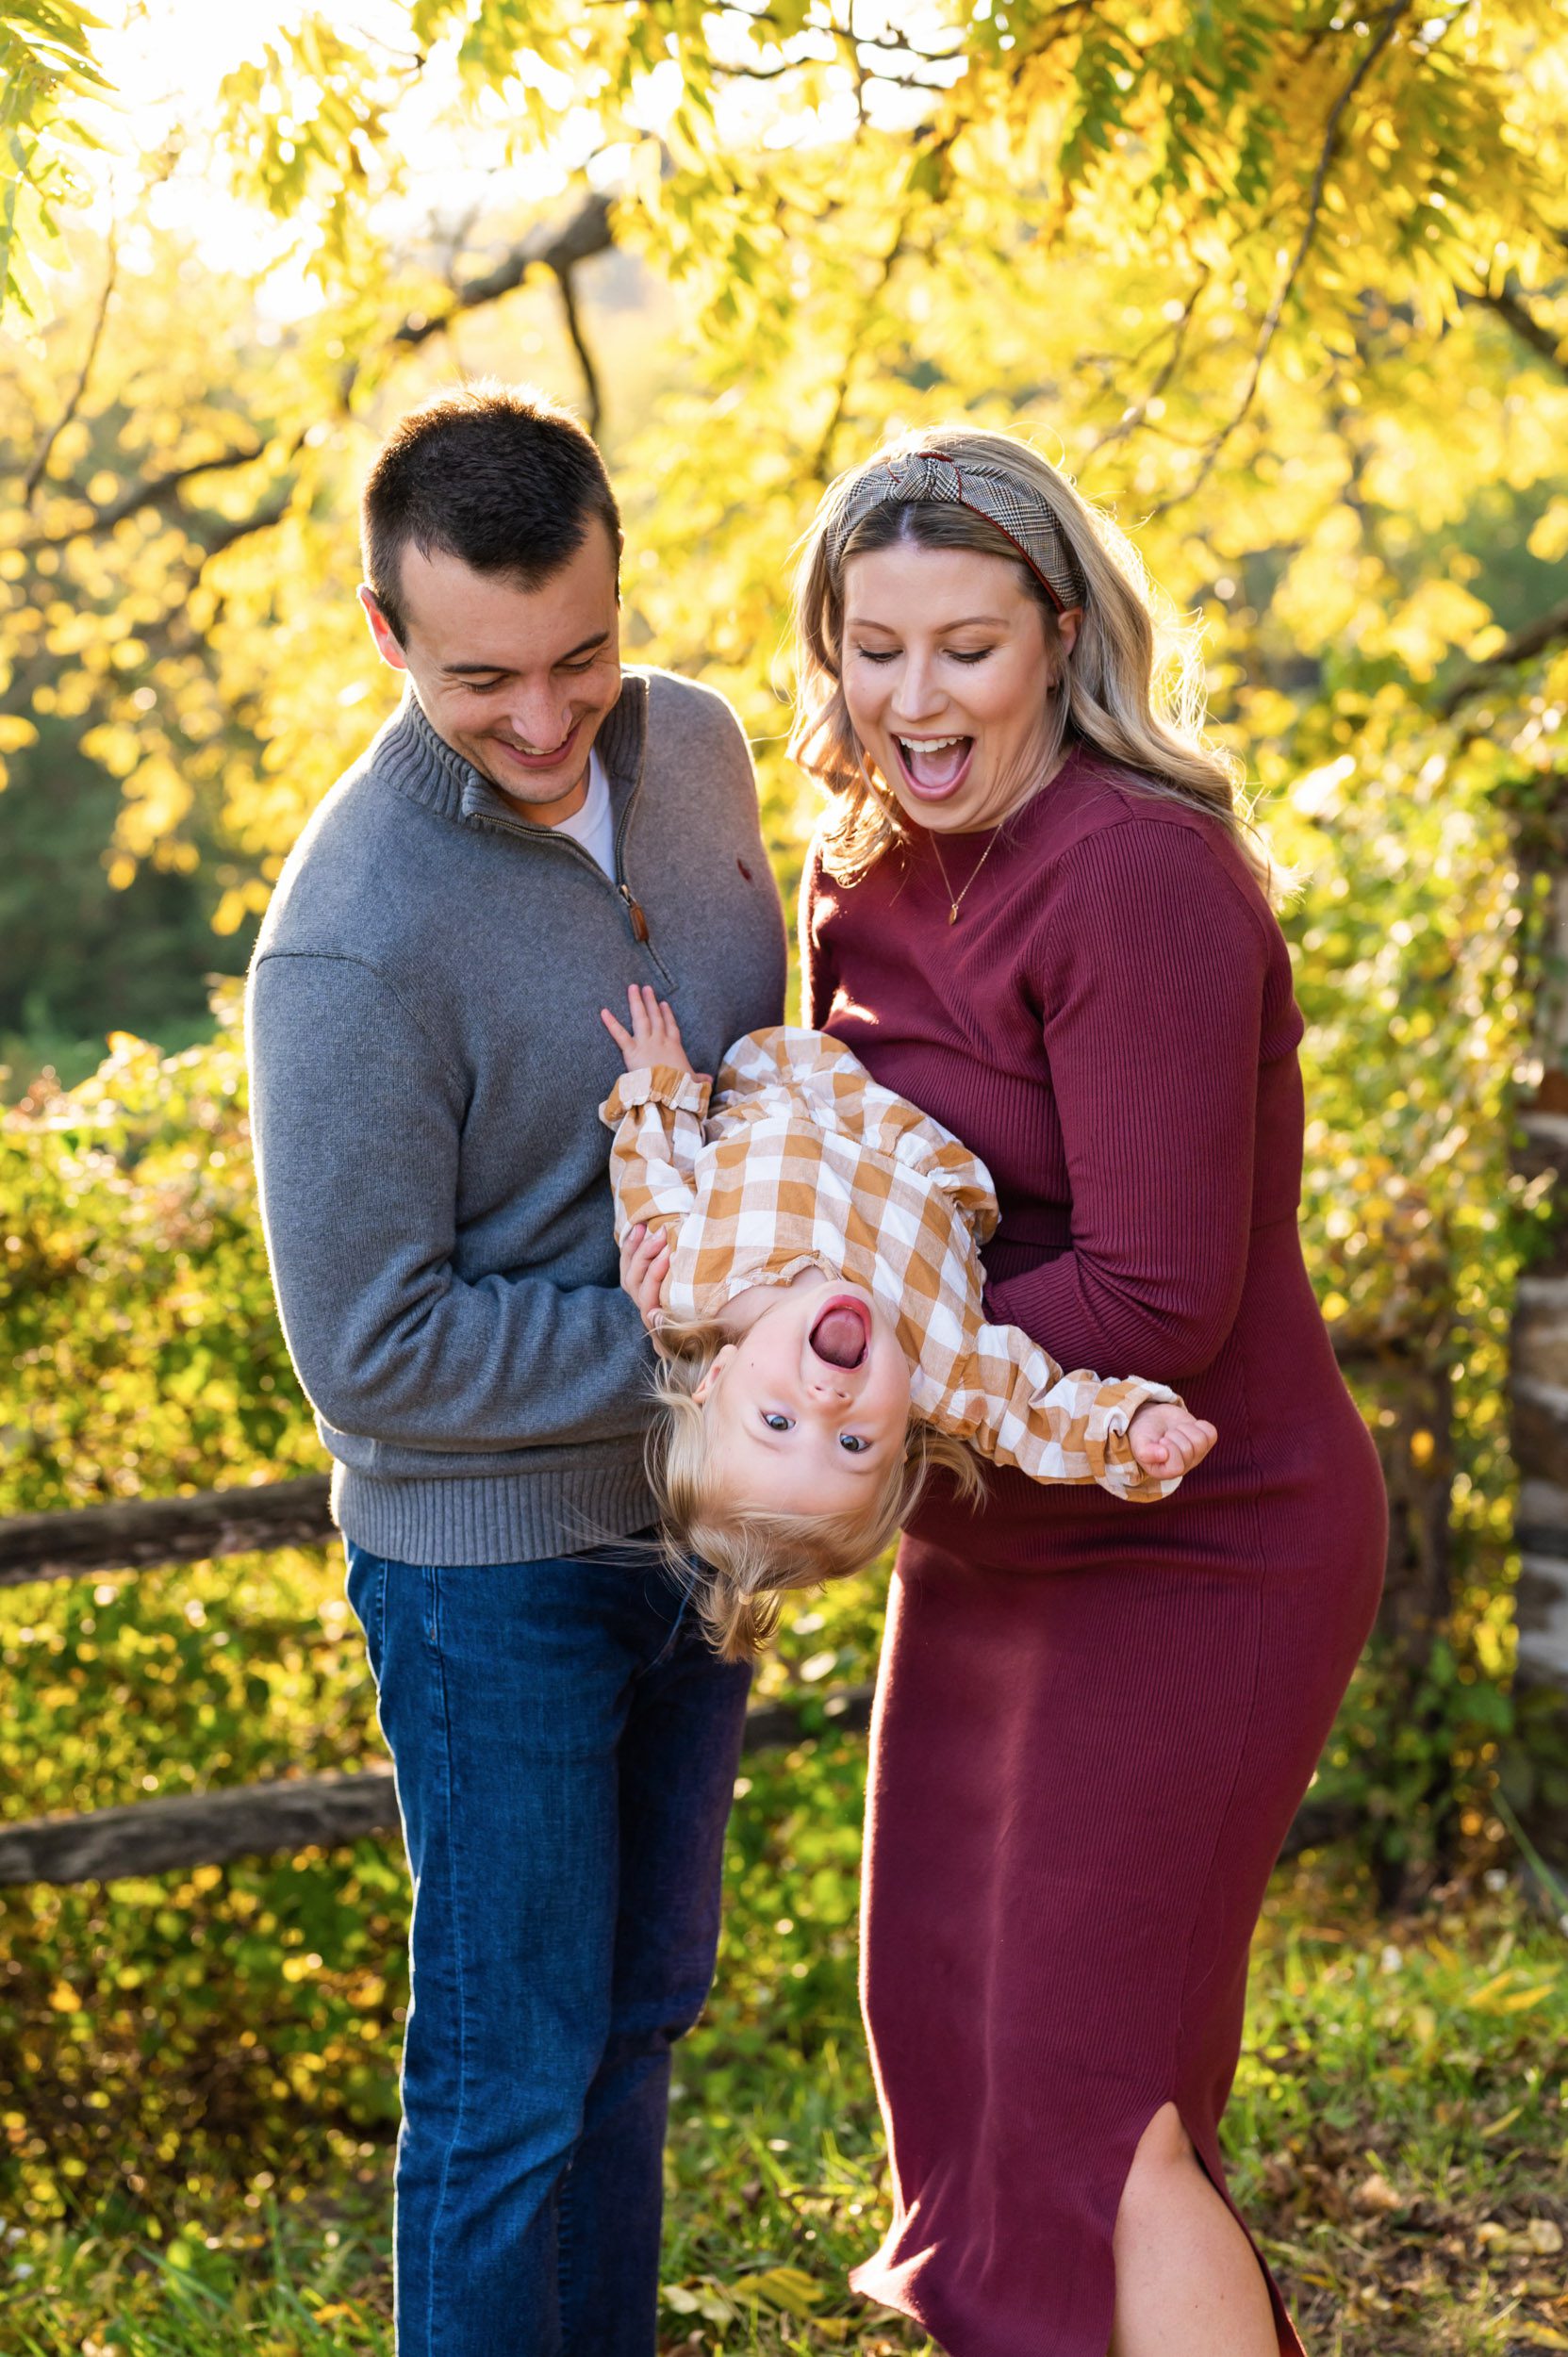 expecting parents holding their young daughter upside down and laughing as they look down at her during a maternity photoshoot